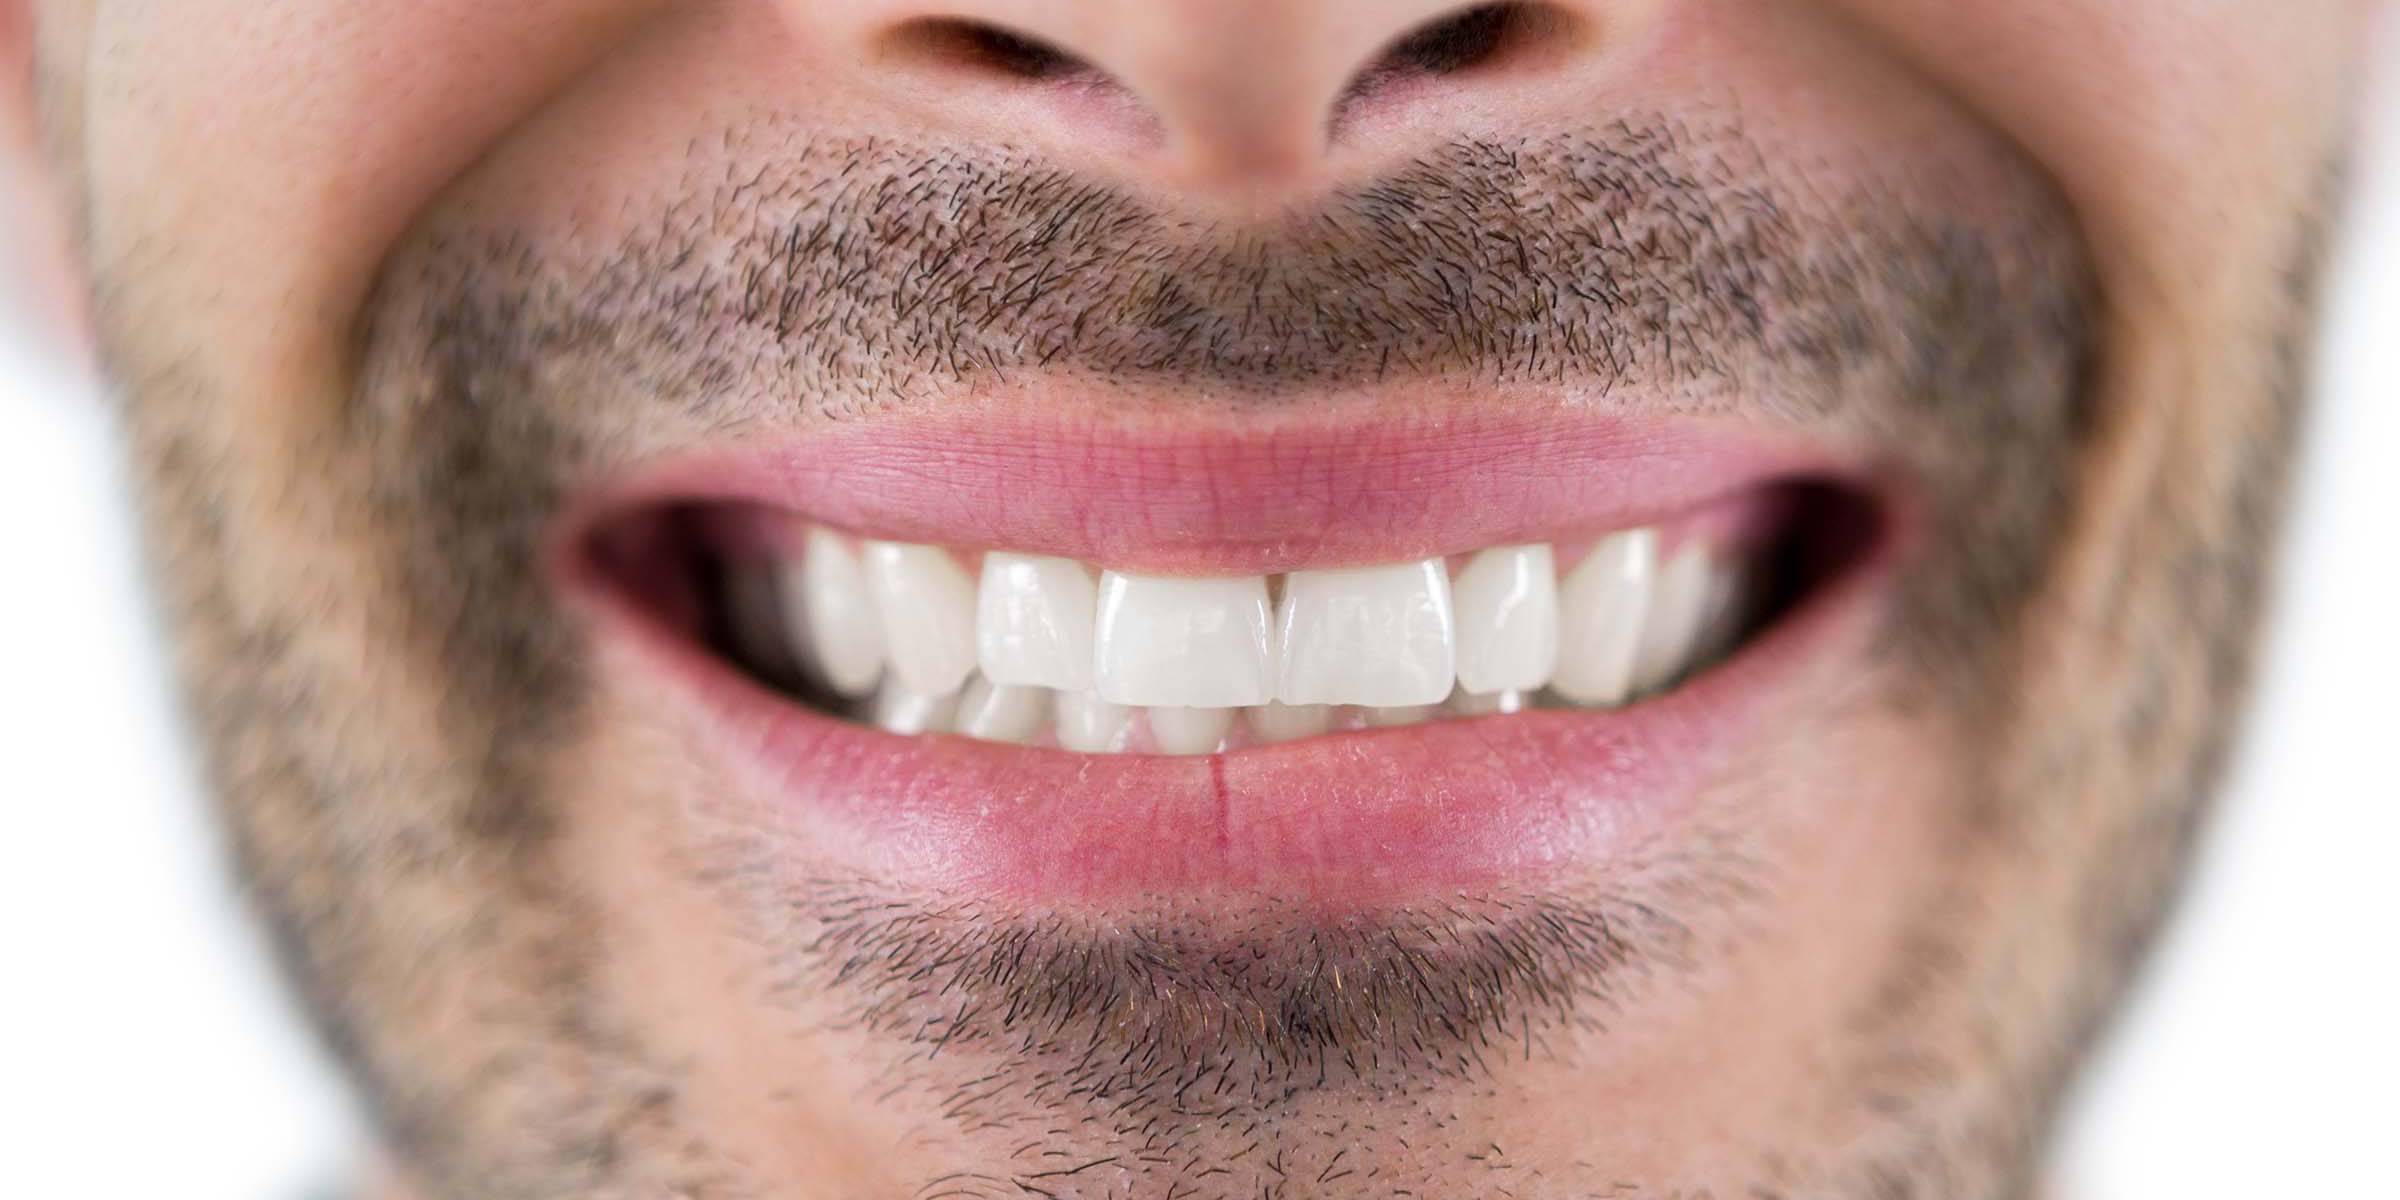 Man showing his teeth after treatment